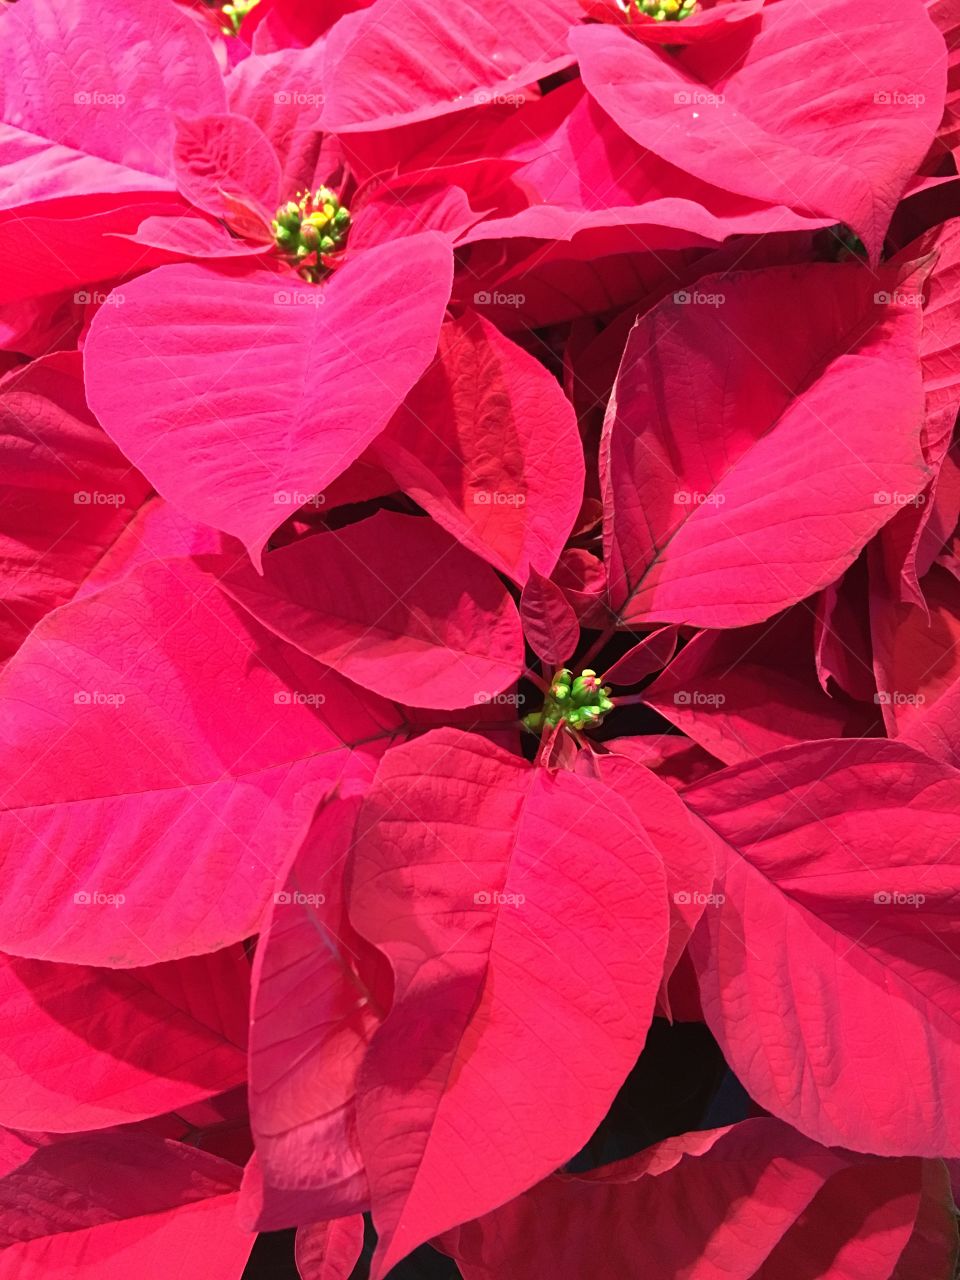 Closeup red poinsettia flowers for the holiday 